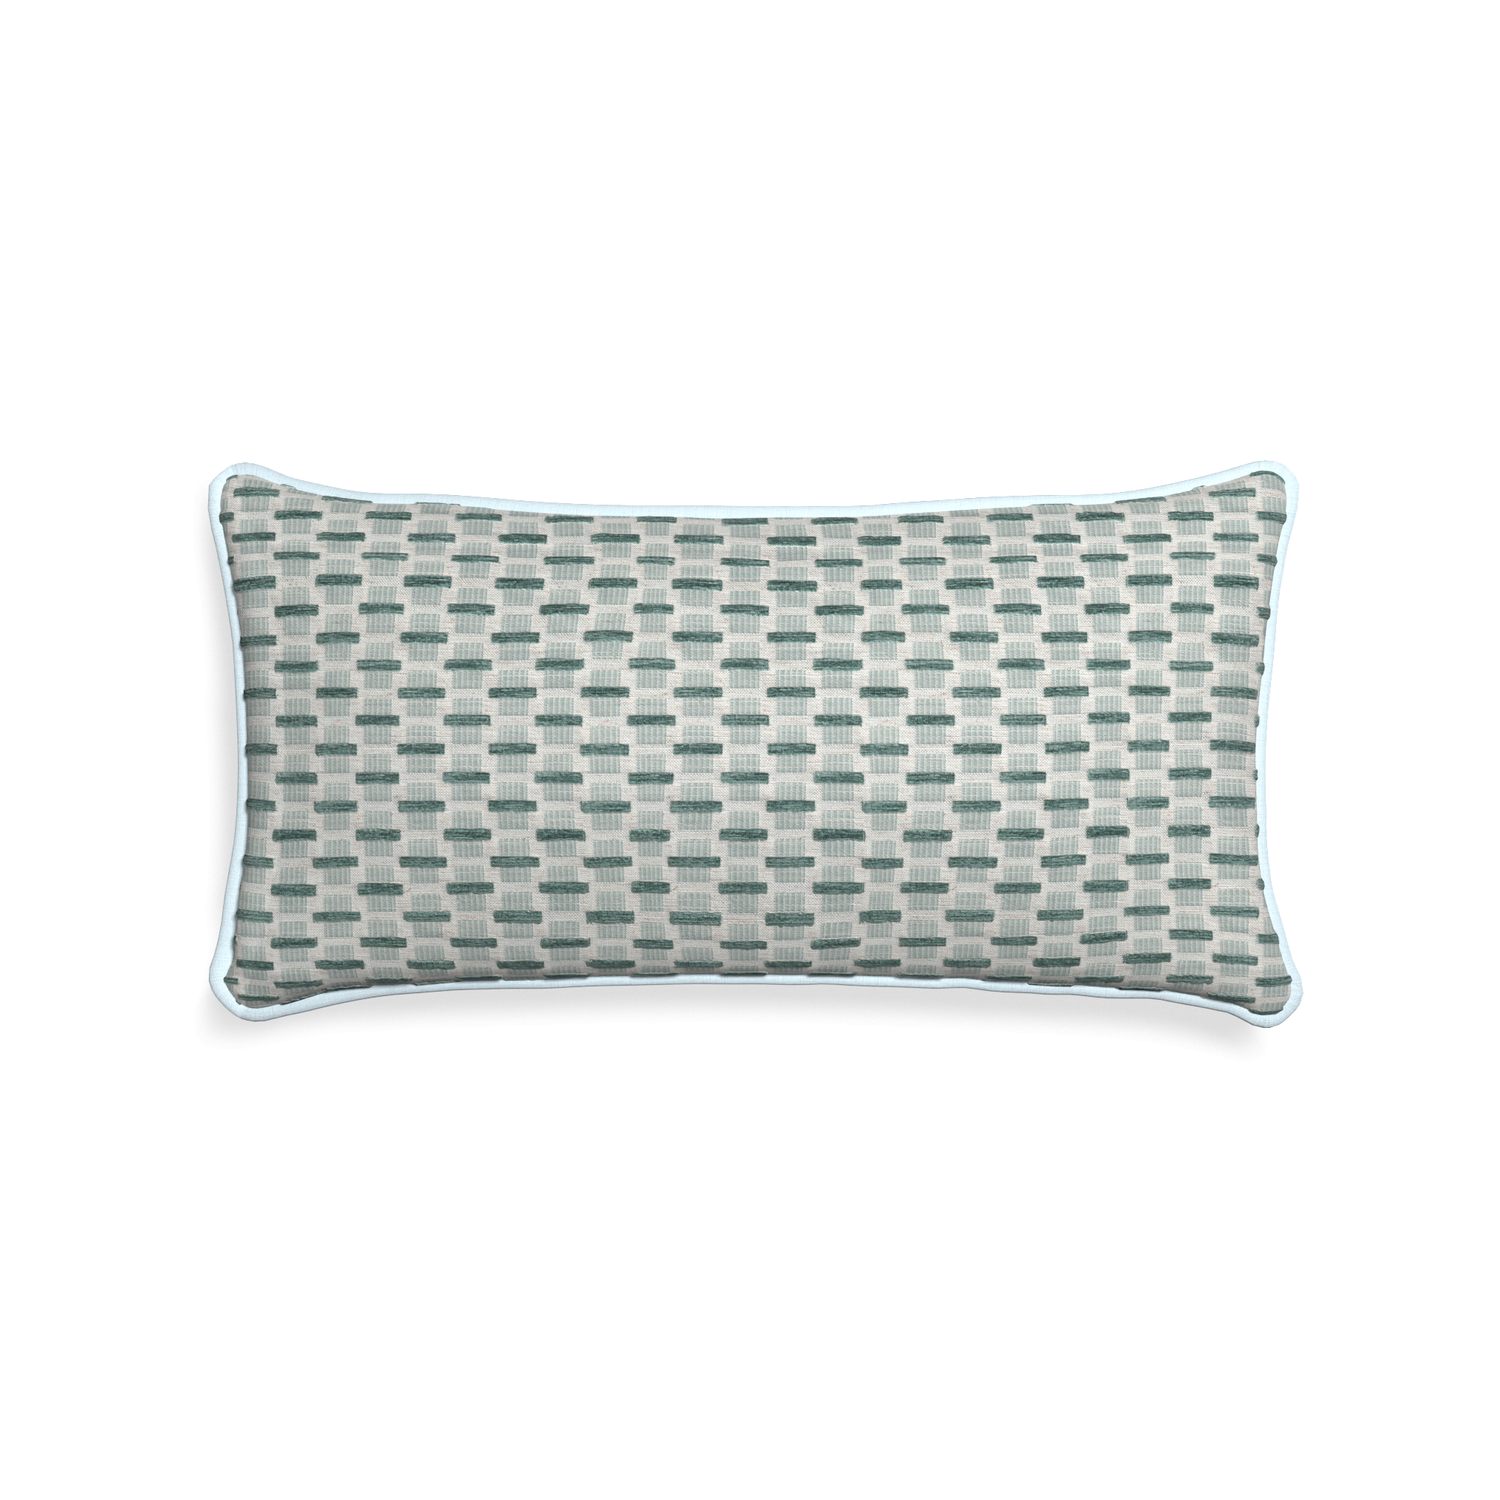 Midi-lumbar willow mint custom green geometric chenillepillow with powder piping on white background